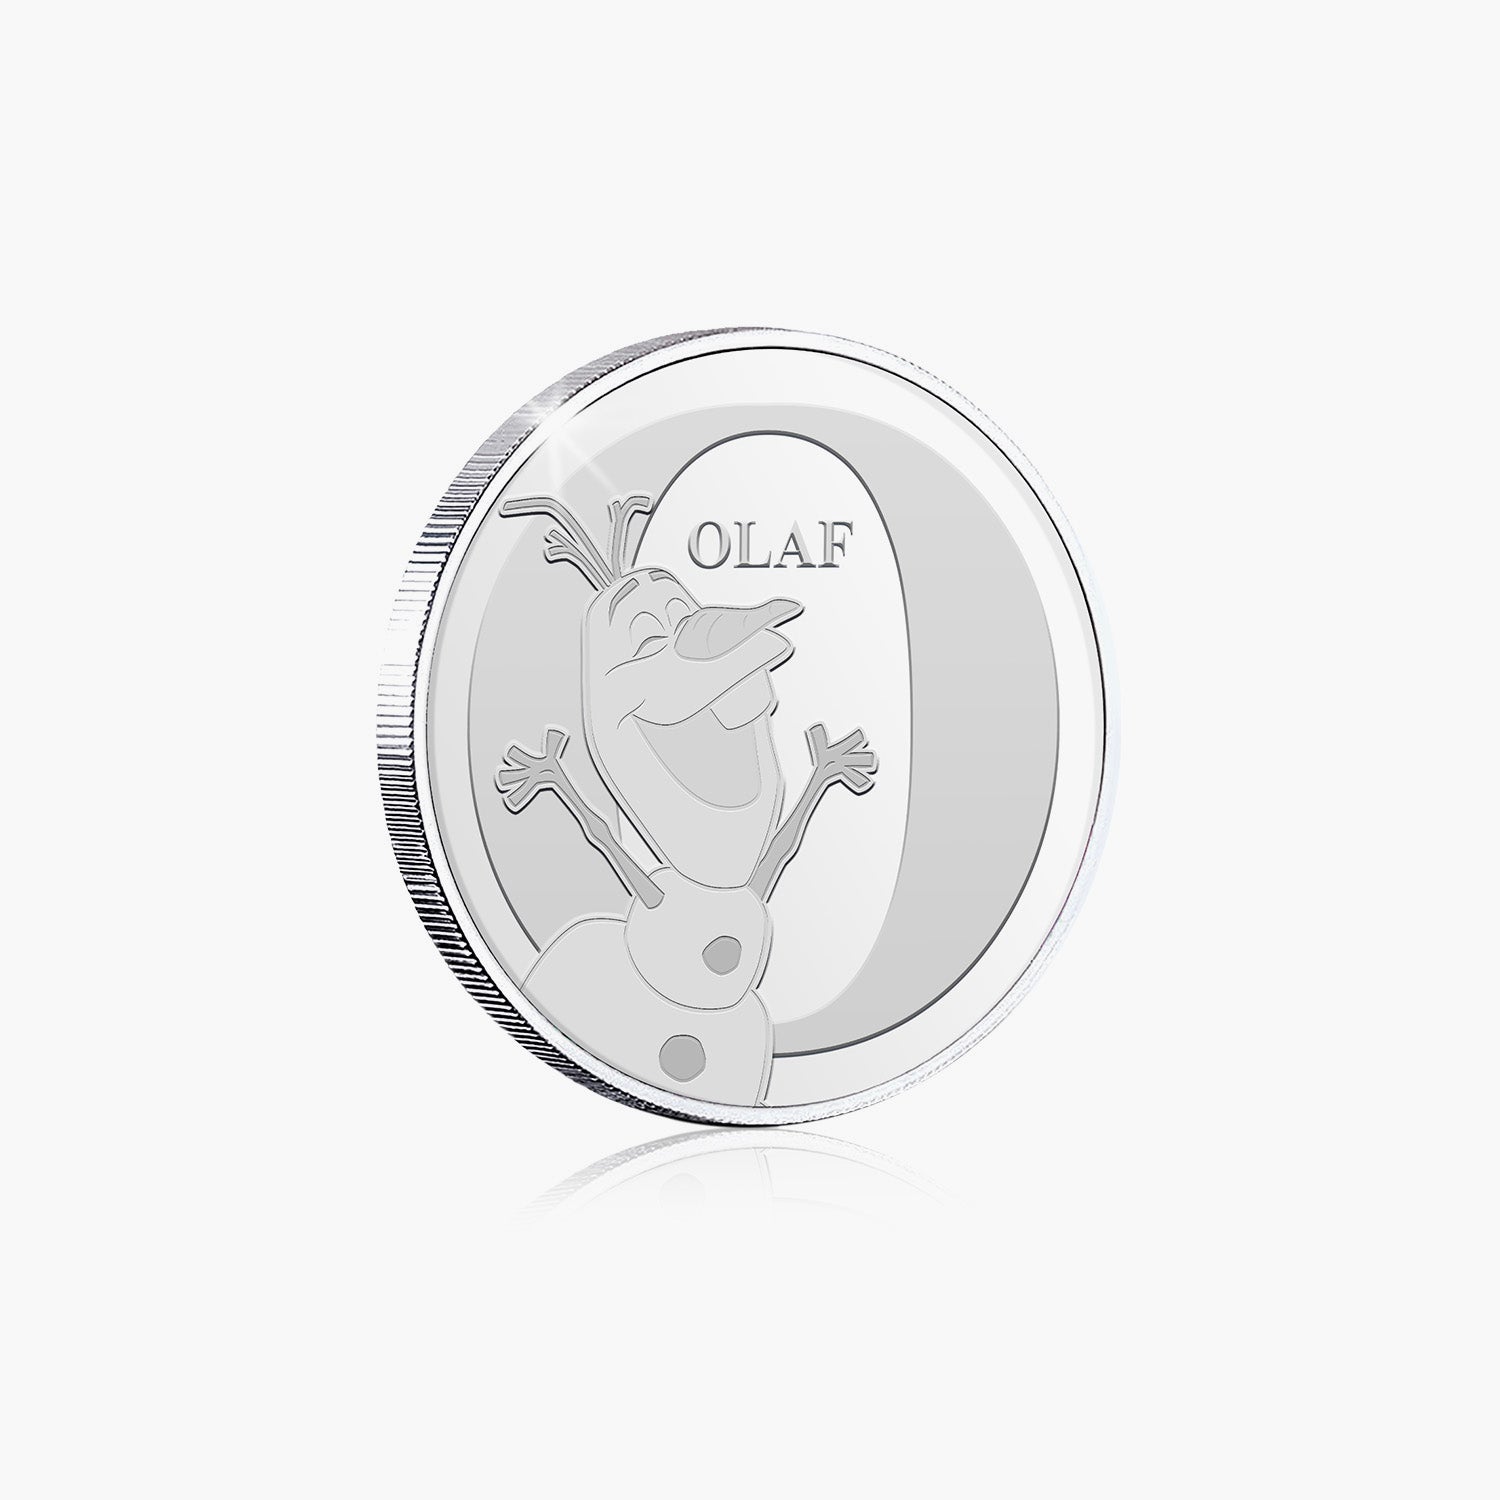 O Is For Olaf Silver-Plated Commemorative